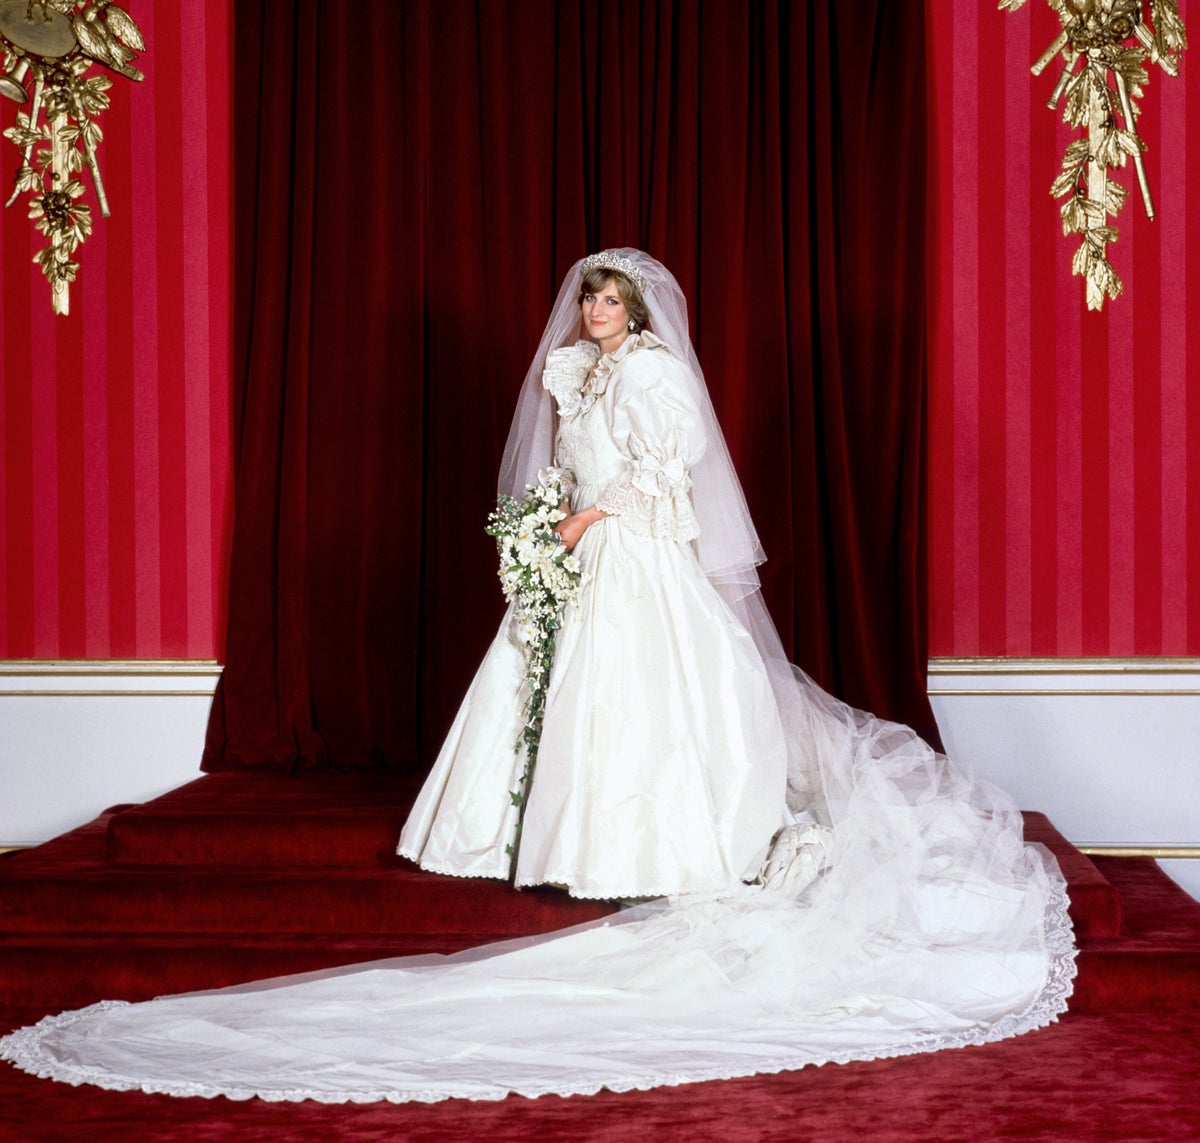 Charles And Diana 40 Year Anniversary 5 Things You Didn T Know About Her Wedding Dress The Independent